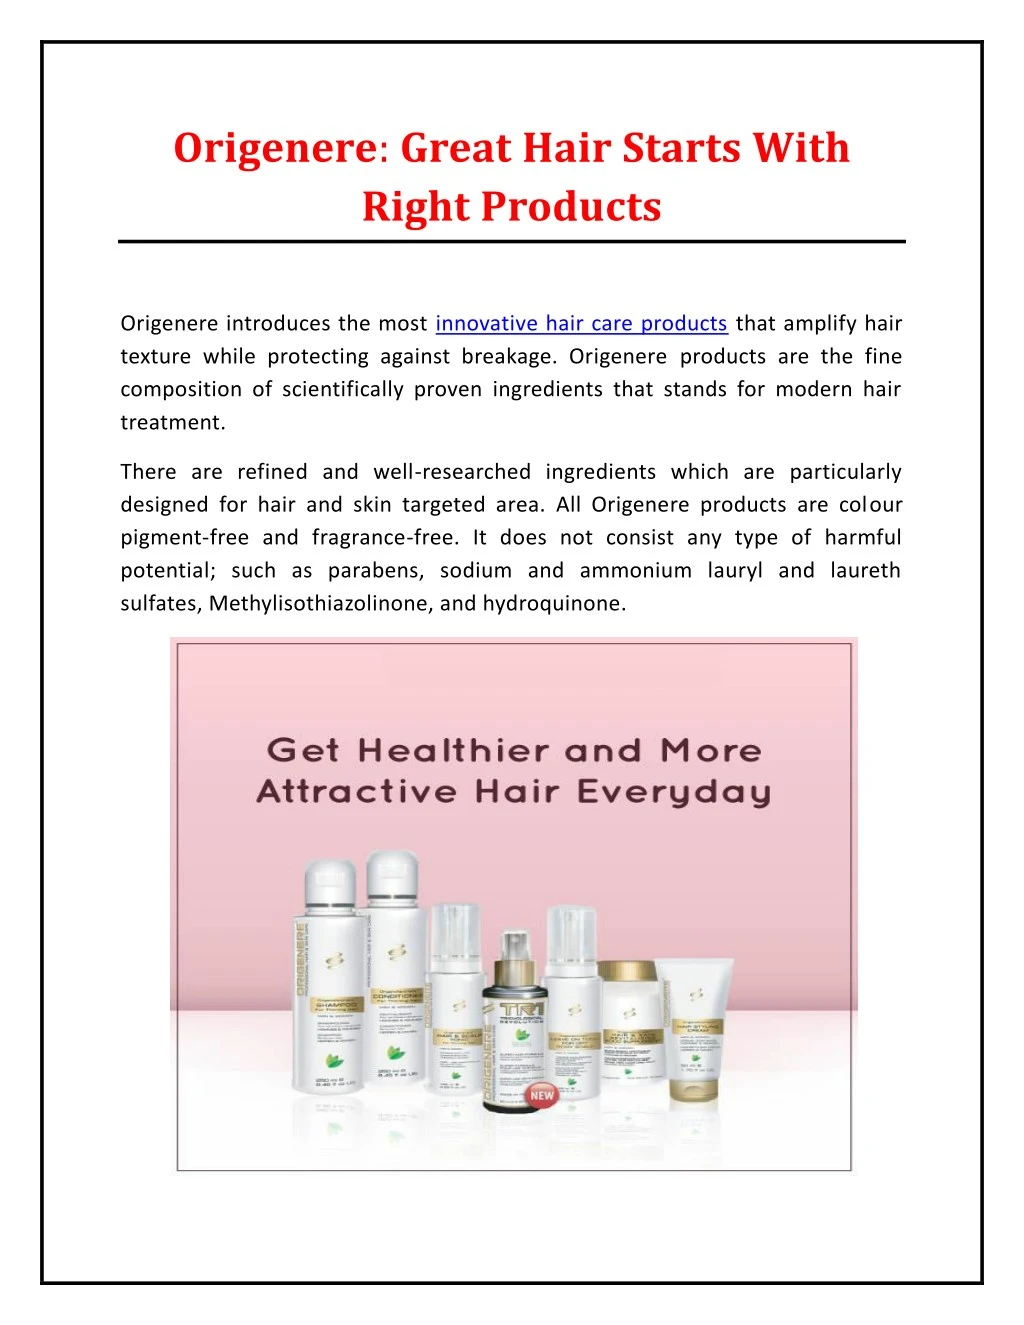 origenere great hair starts with right products